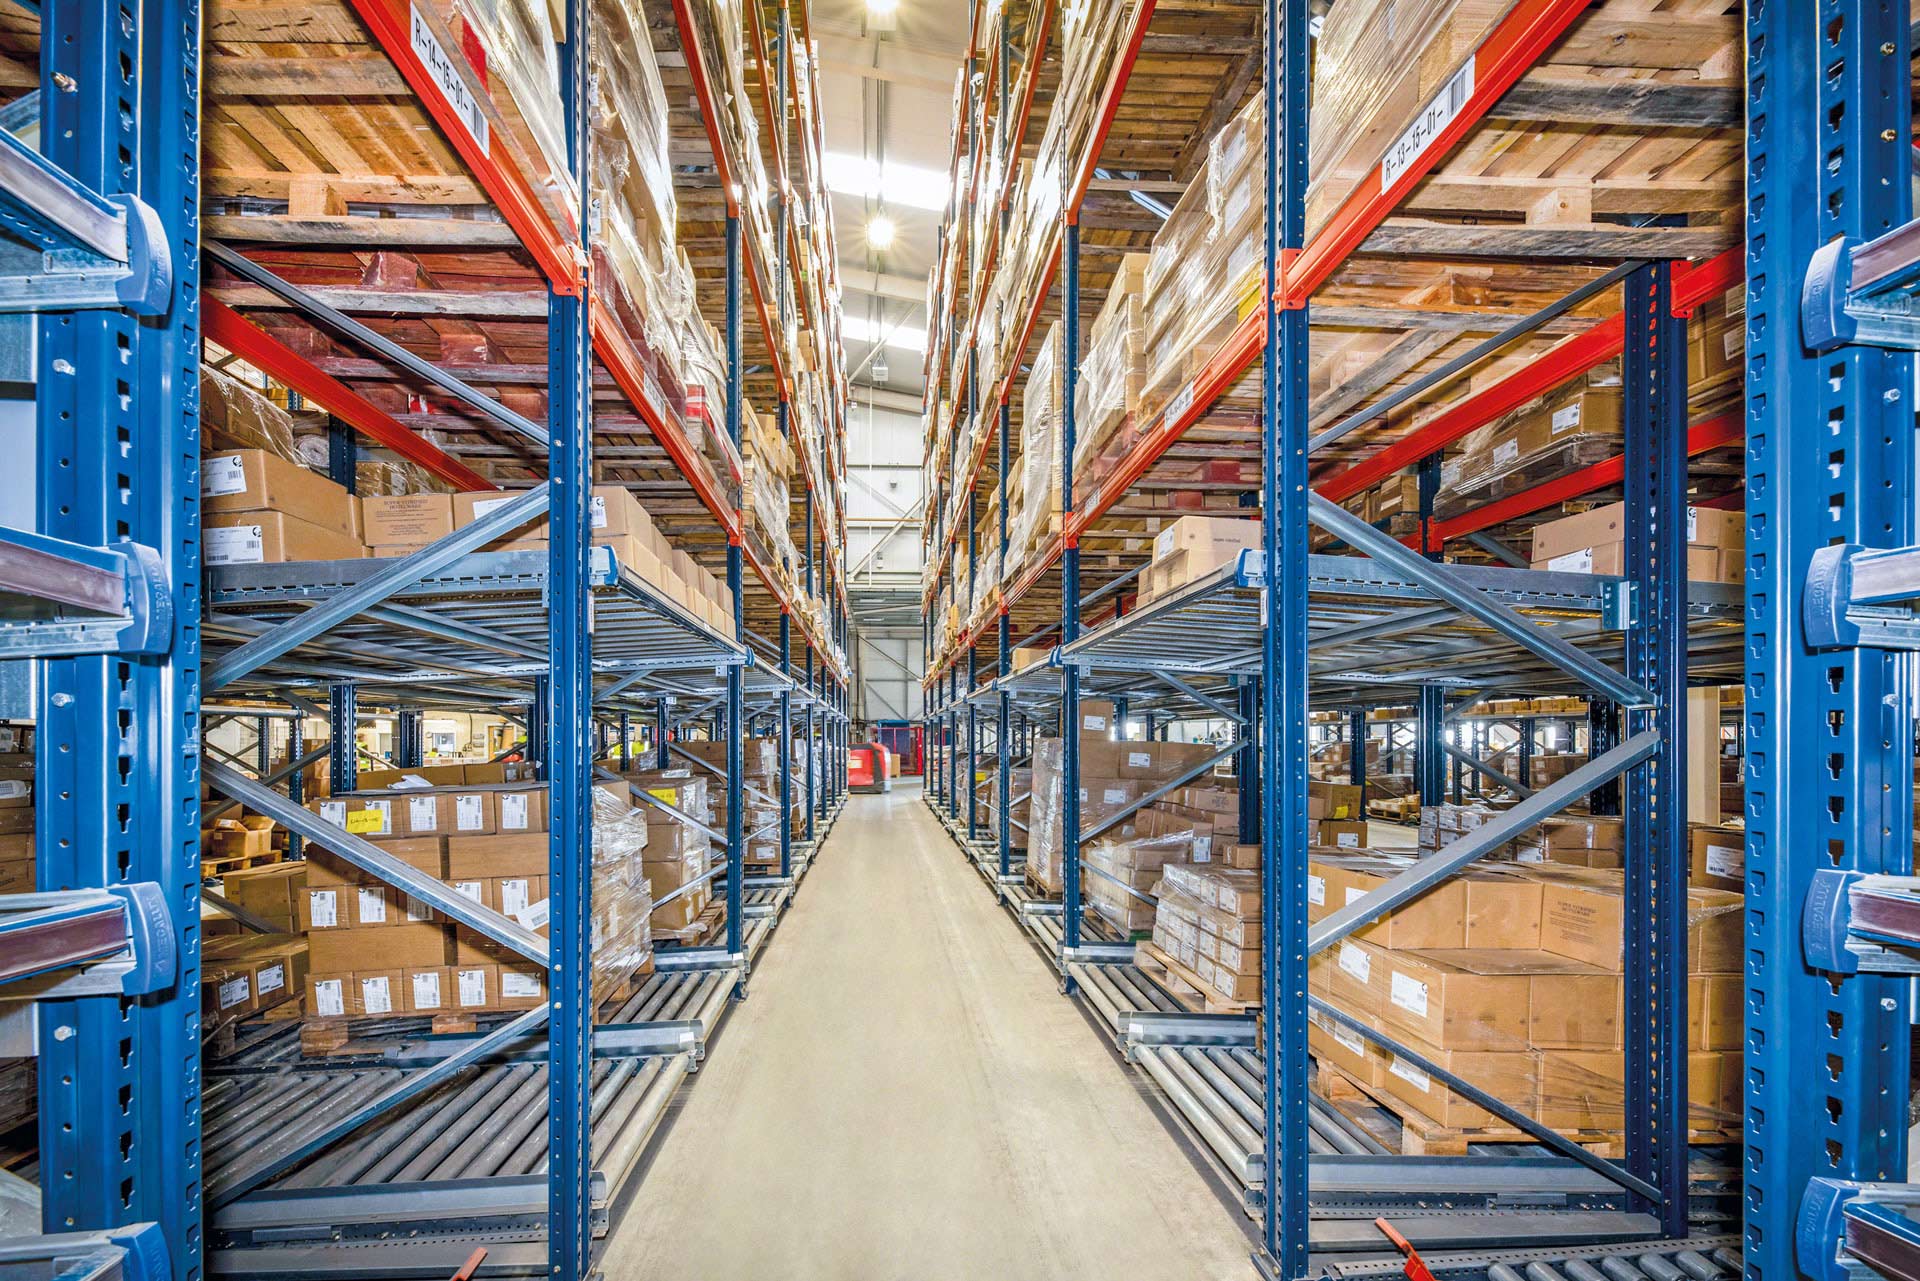 It is possible to combine selective pallet racking with pallet flow racks on the lower levels